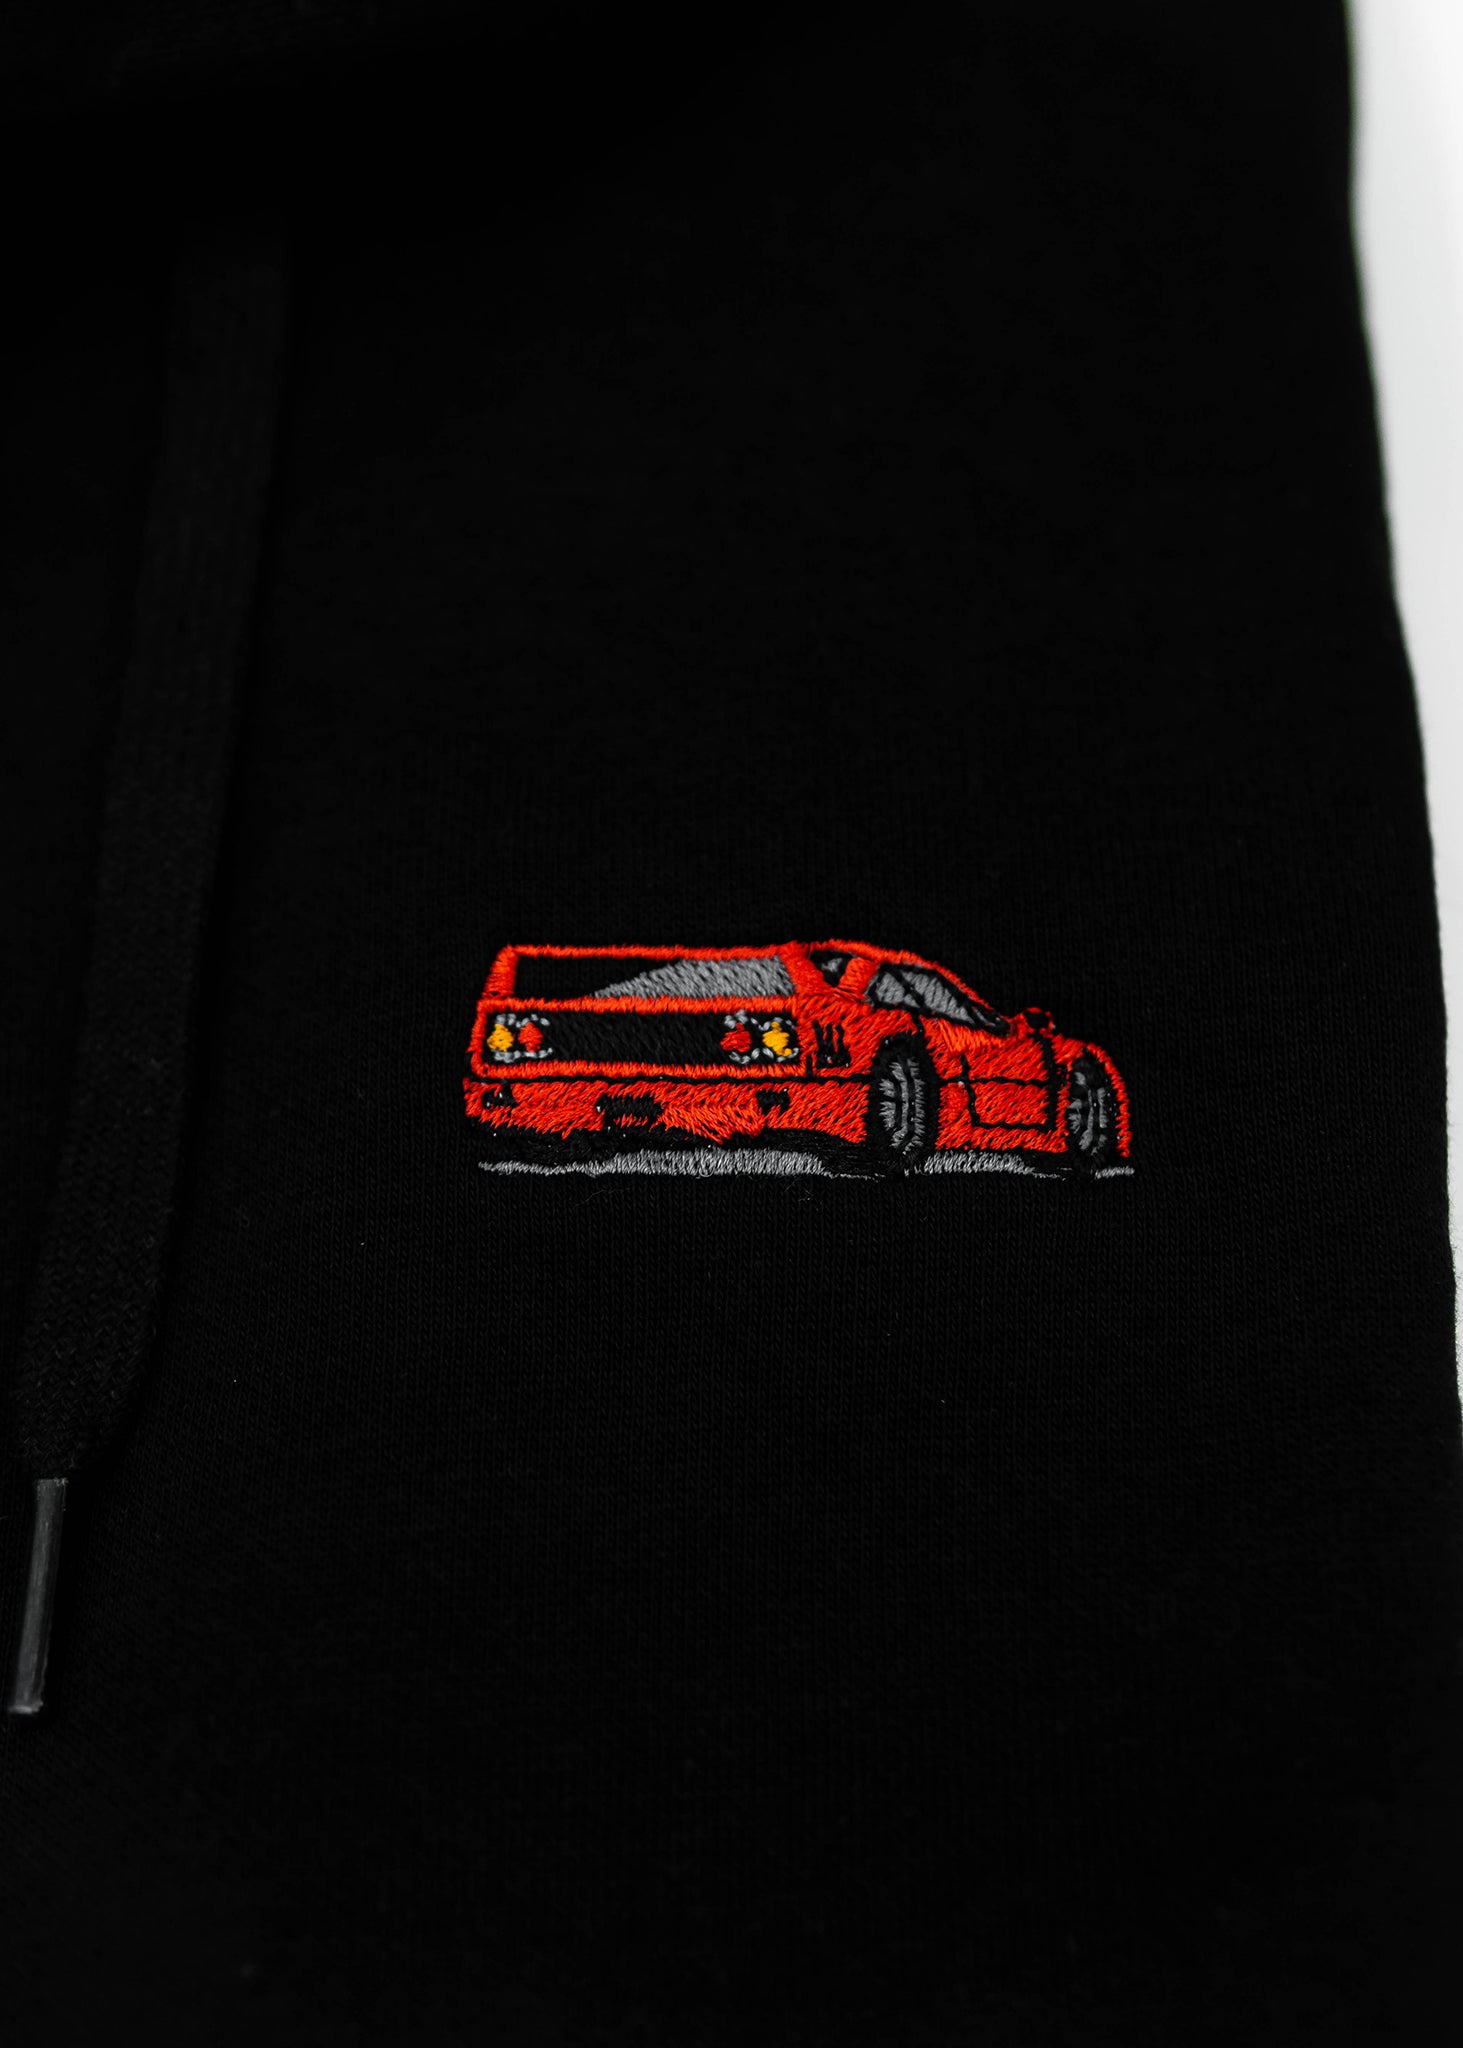 Close up of an embroidered F40 on a black unisex hoodie for men and women. Photo shows the high quality detailed embroidery of a red F40. Fabric composition of the sweater is cotton, polyester, and rayon. The material is very soft, stretchy, and non-transparent. The style of this hoodie is long sleeve, crewneck with a hood, hooded, with embroidery on the left chest.